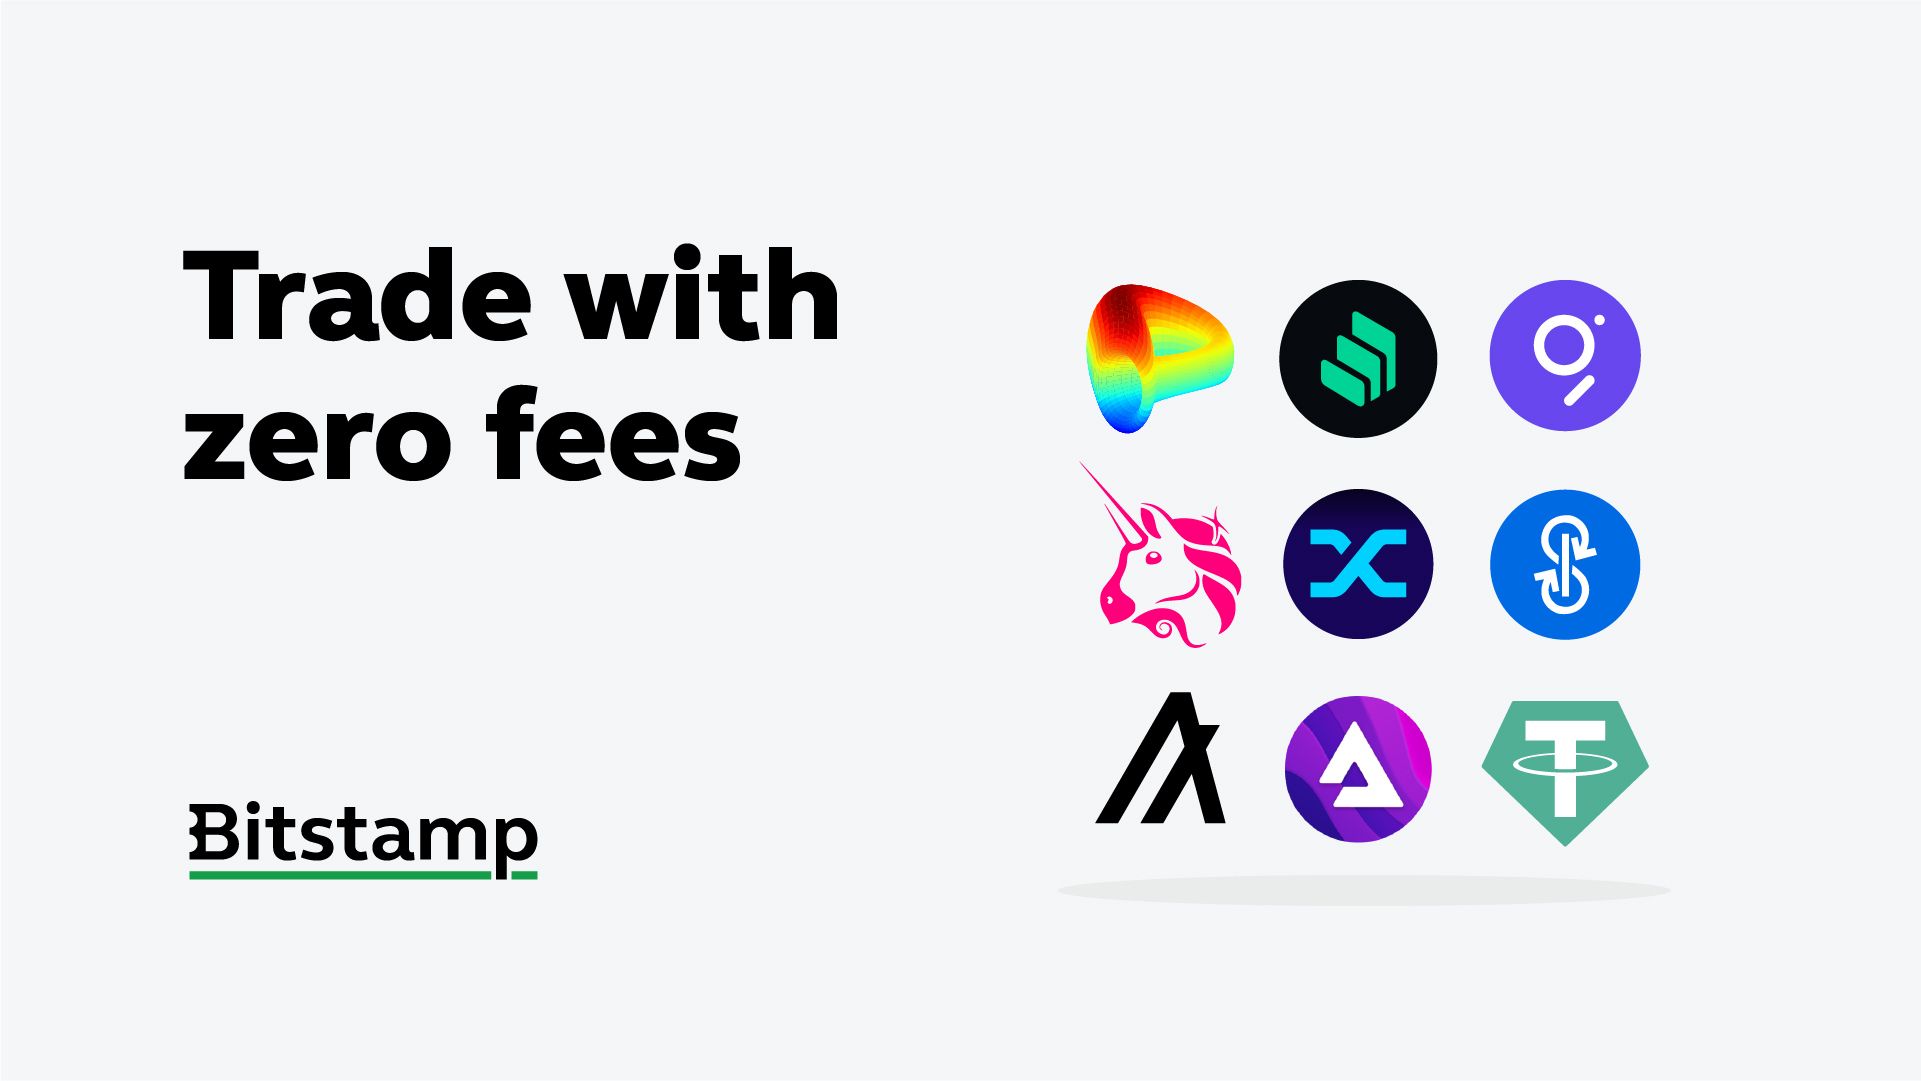 Trade these cryptocurrencies with zero fees at Bitstamp